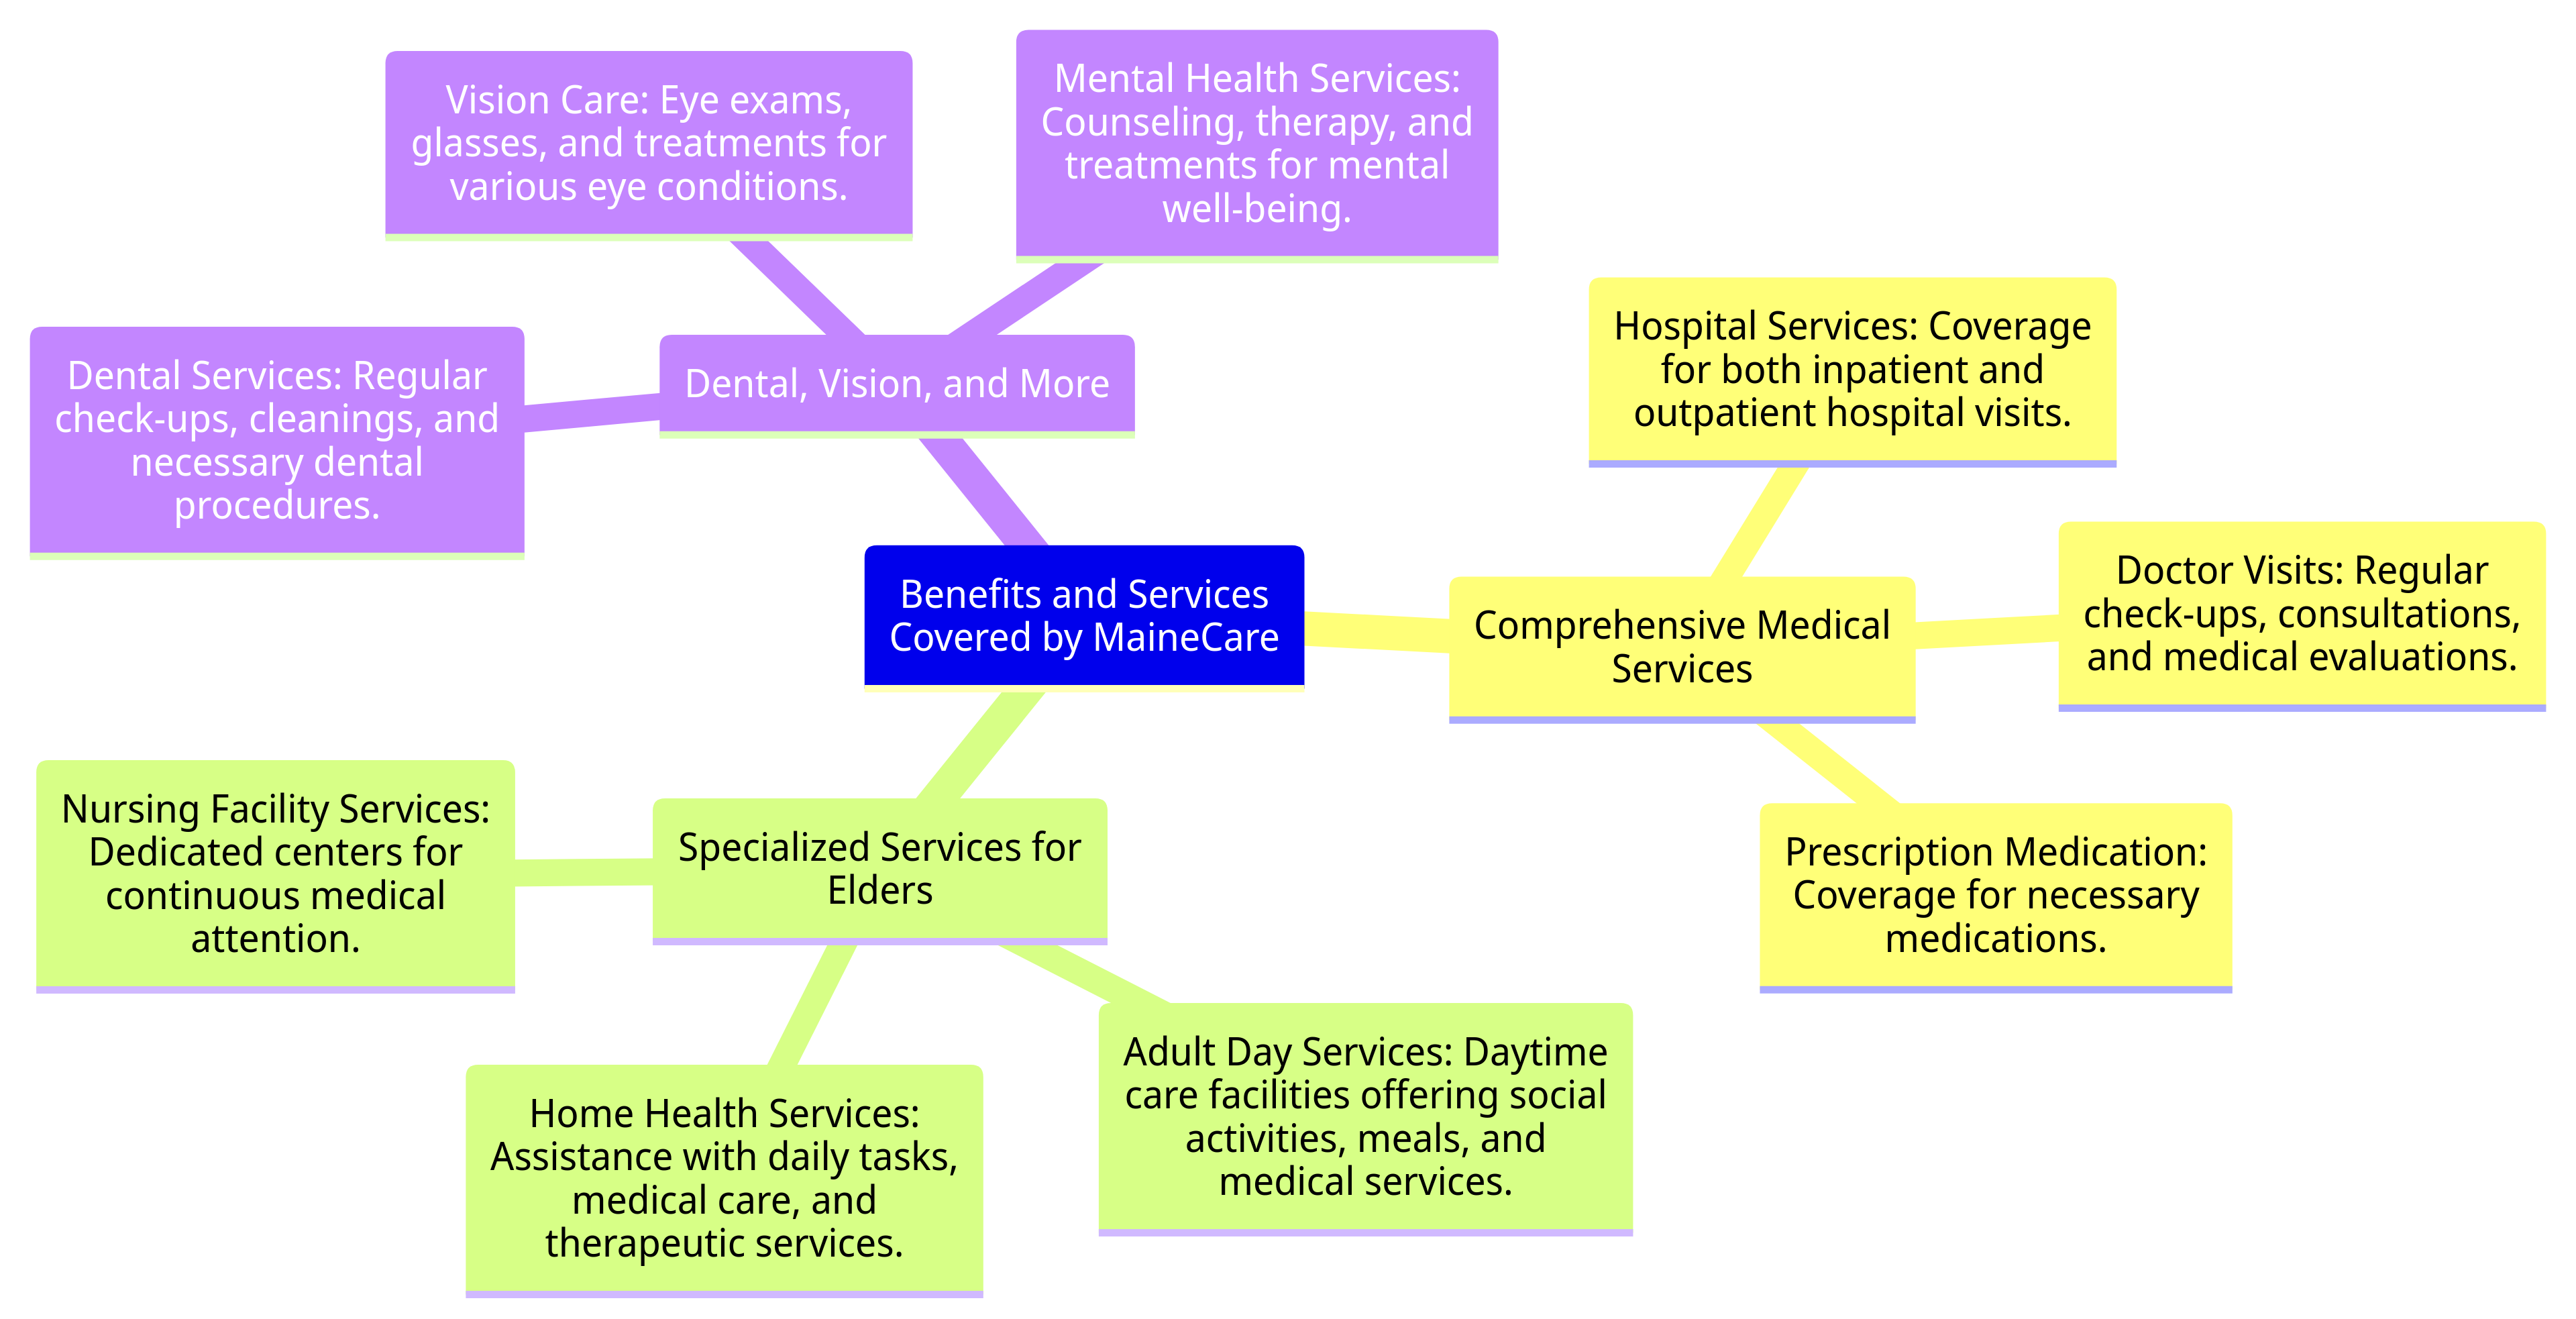 Benefits and Services Covered by MaineCare